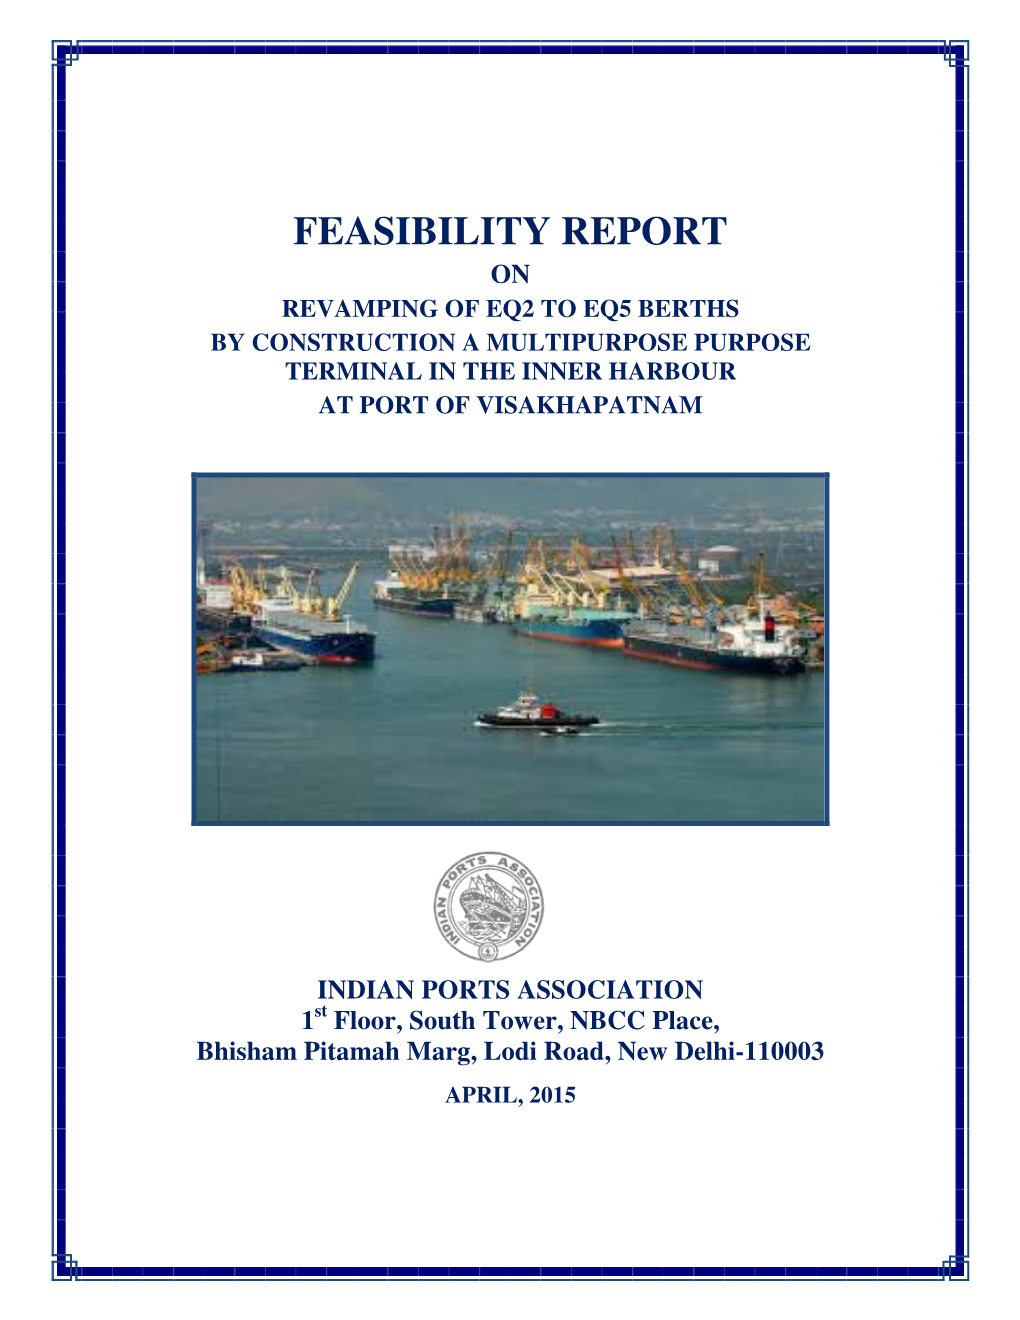 Feasibility Report on Revamping of Eq2 to Eq5 Berths by Construction a Multipurpose Purpose Terminal in the Inner Harbour at Port of Visakhapatnam